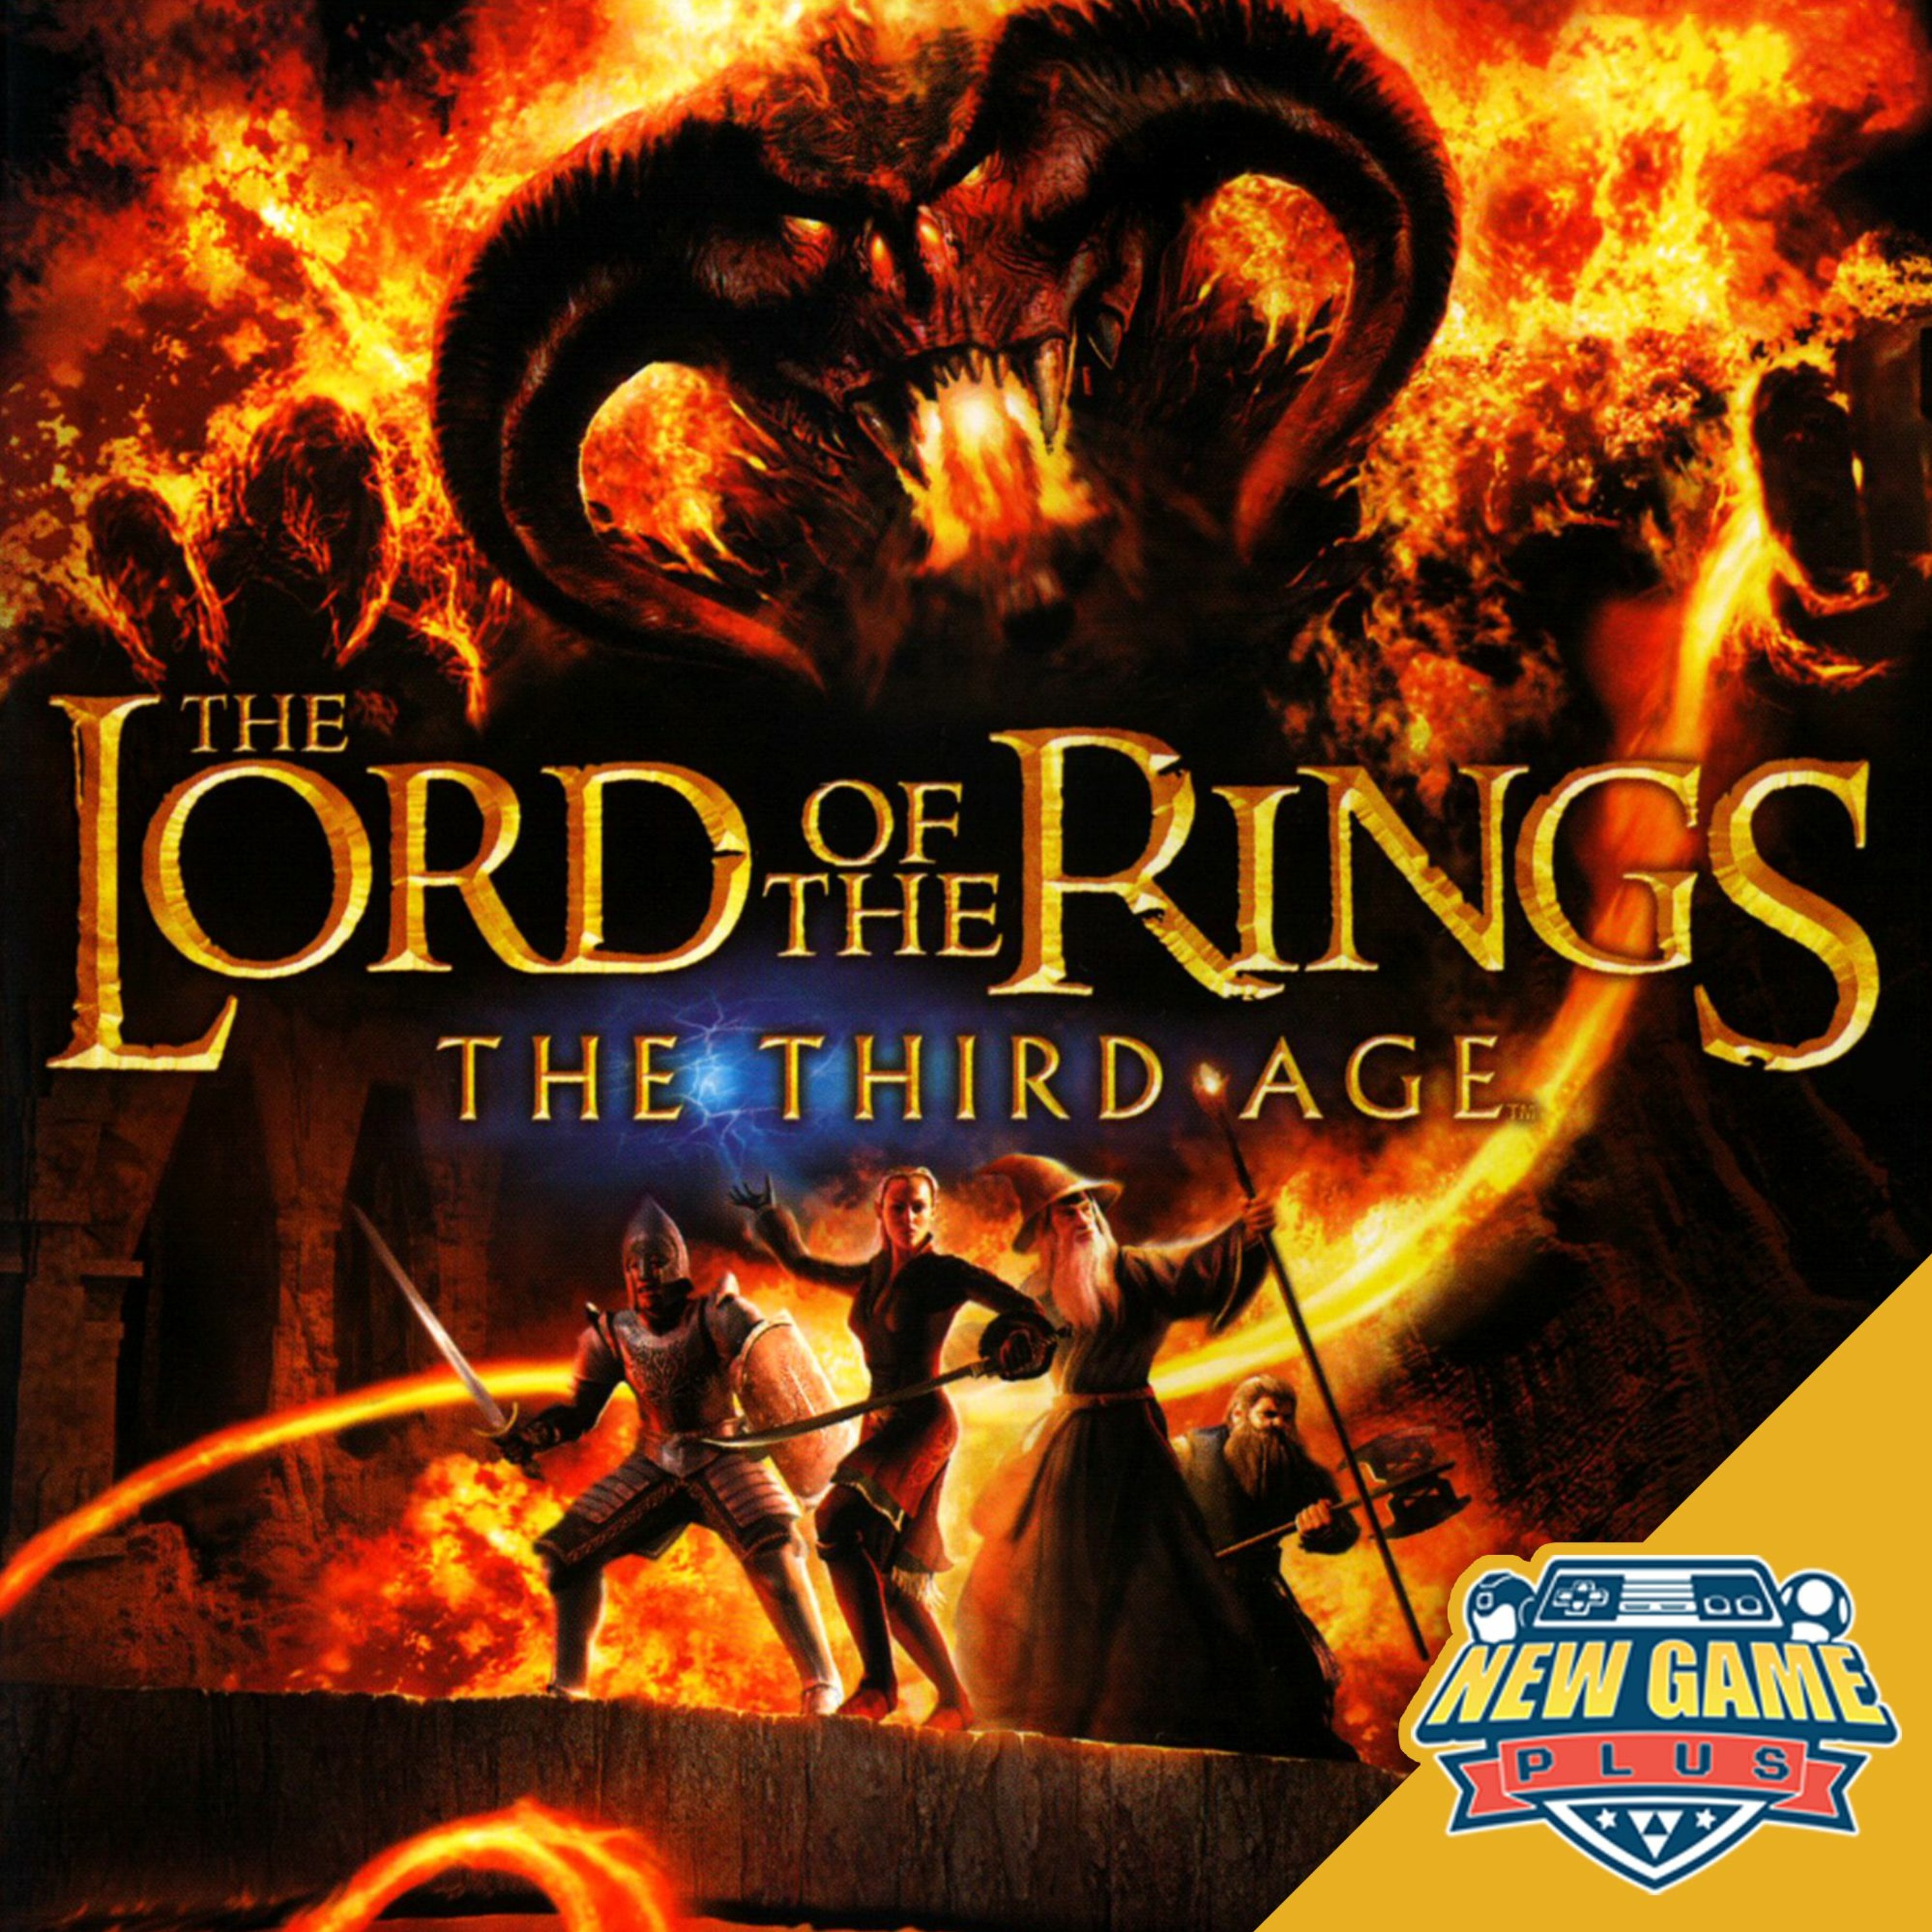 Episode 412: The Lord of the Rings: The Third Age